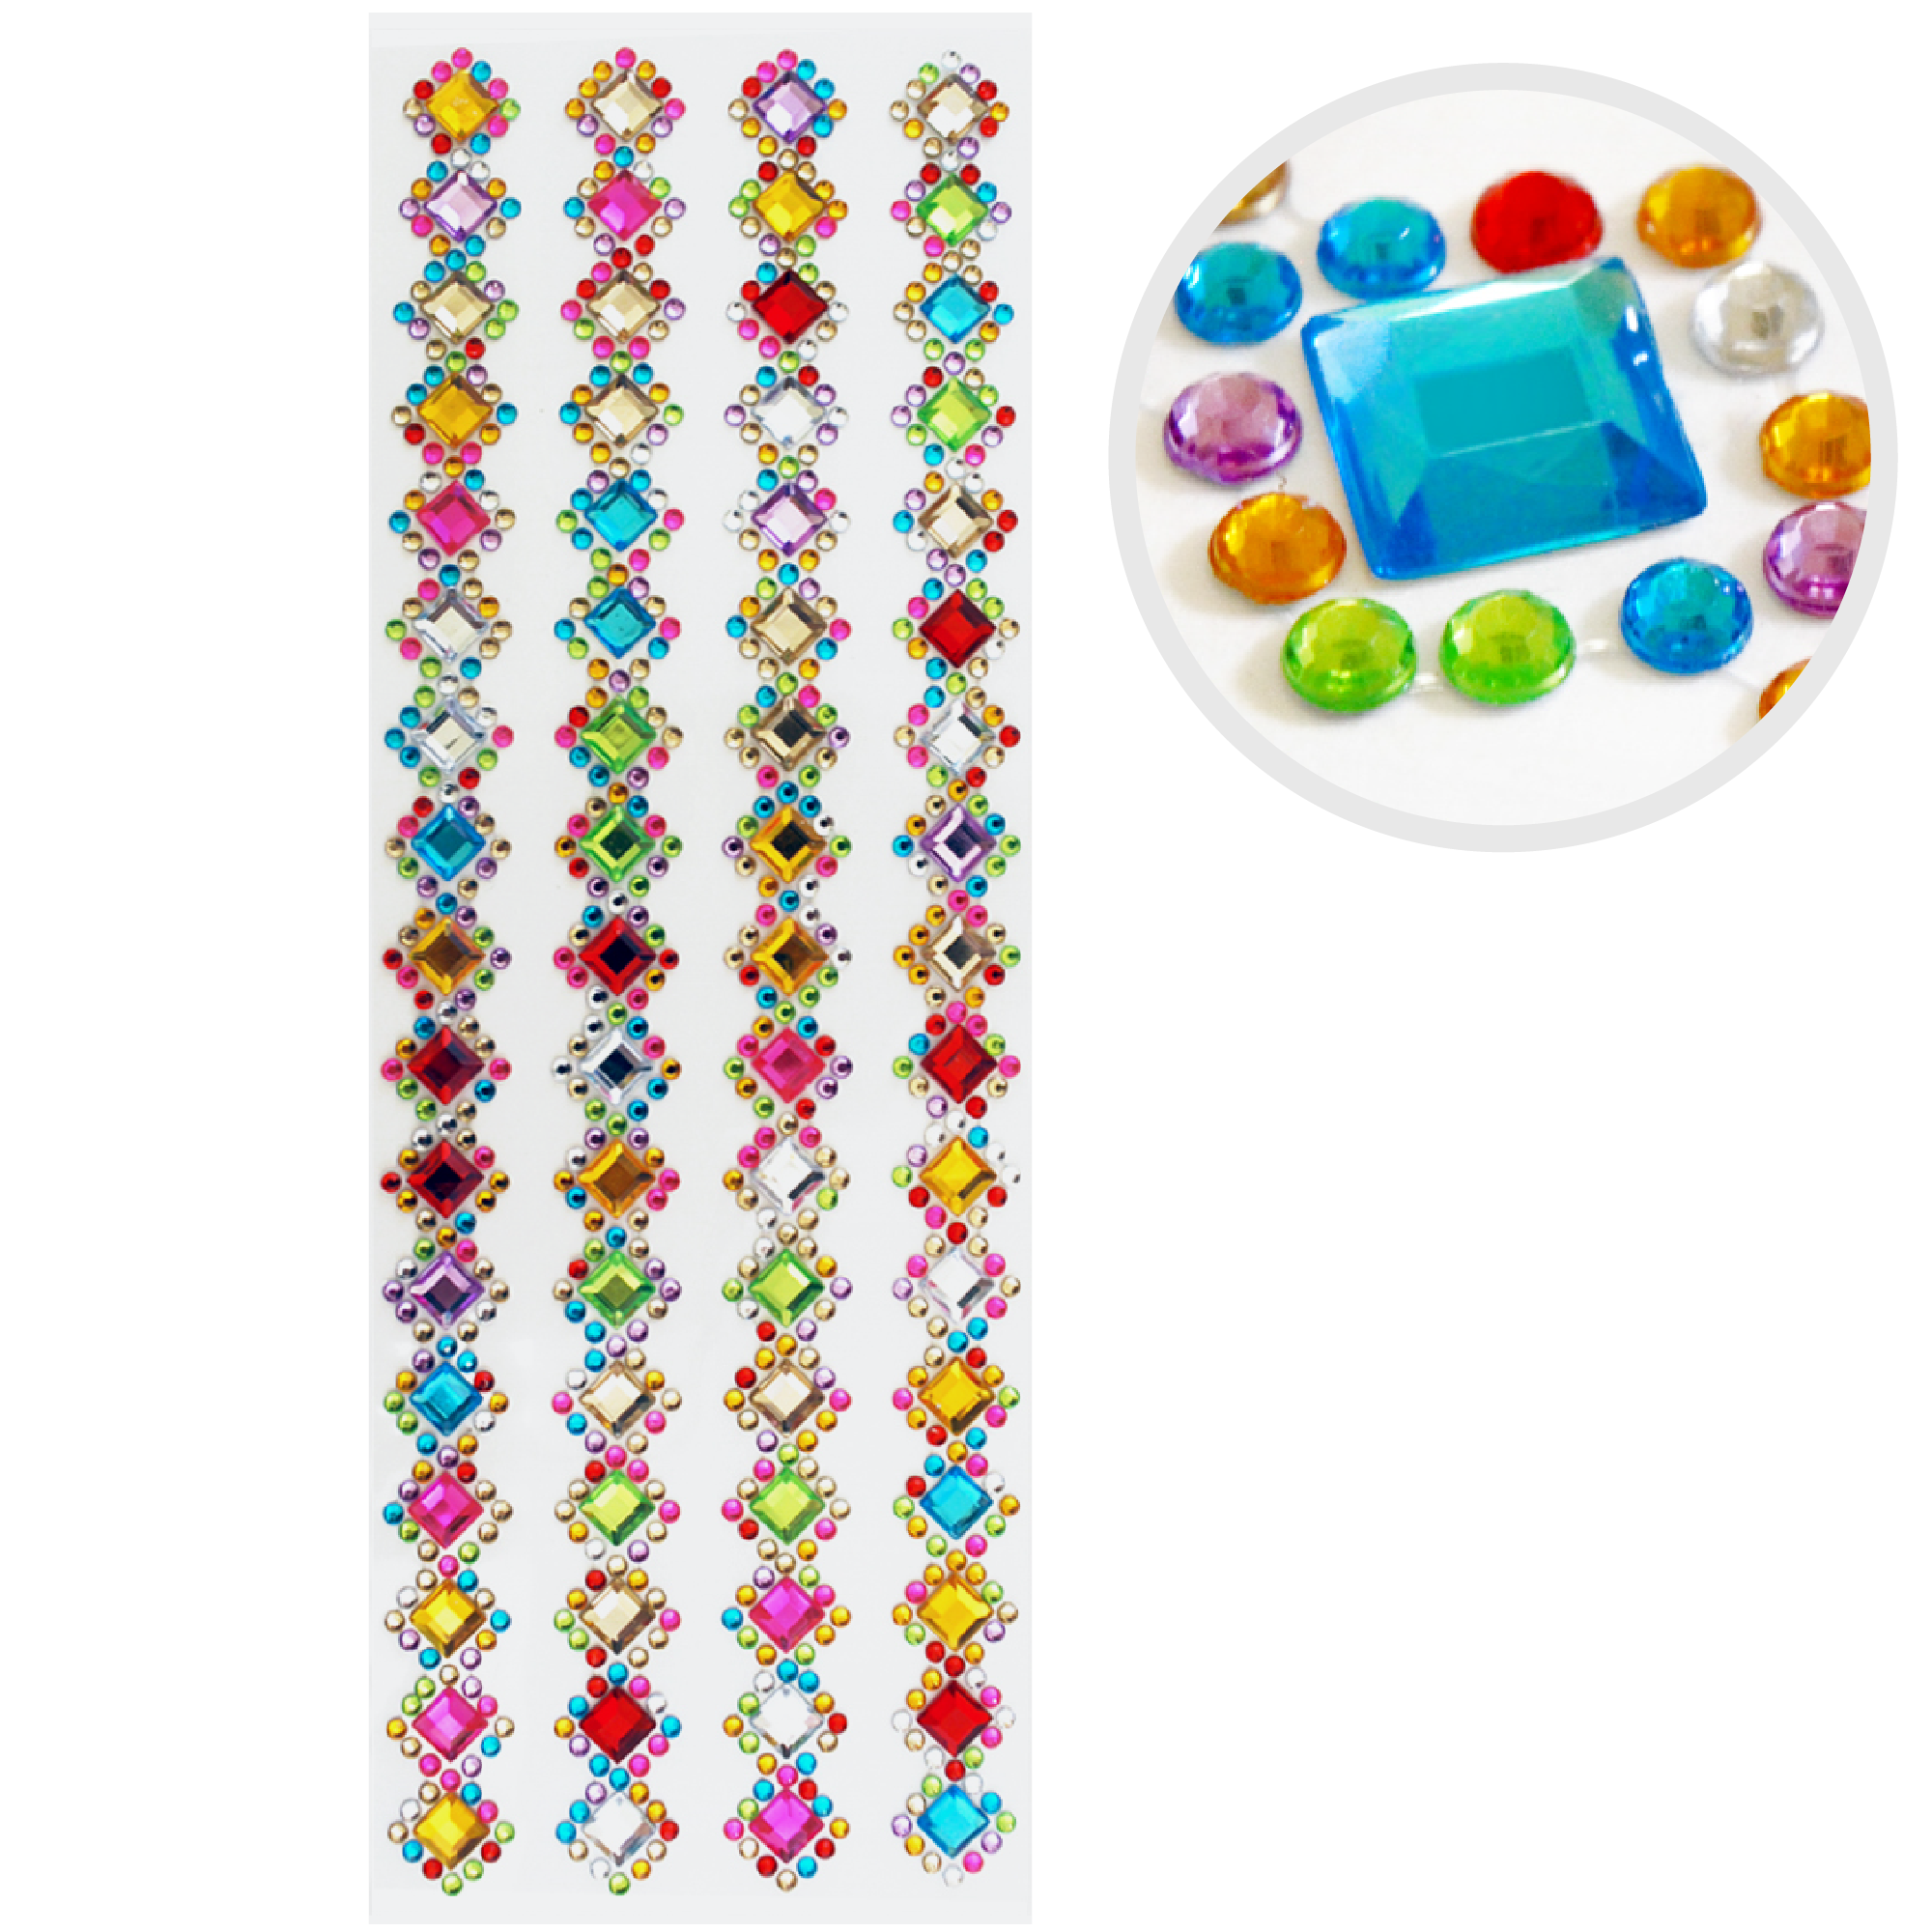 Jolee's Bling Border Stickers: 4 Pcs Jolee's All That Bling Border Sticker  Sheets Bling Stickers Pearl Border Stickers 13-217 